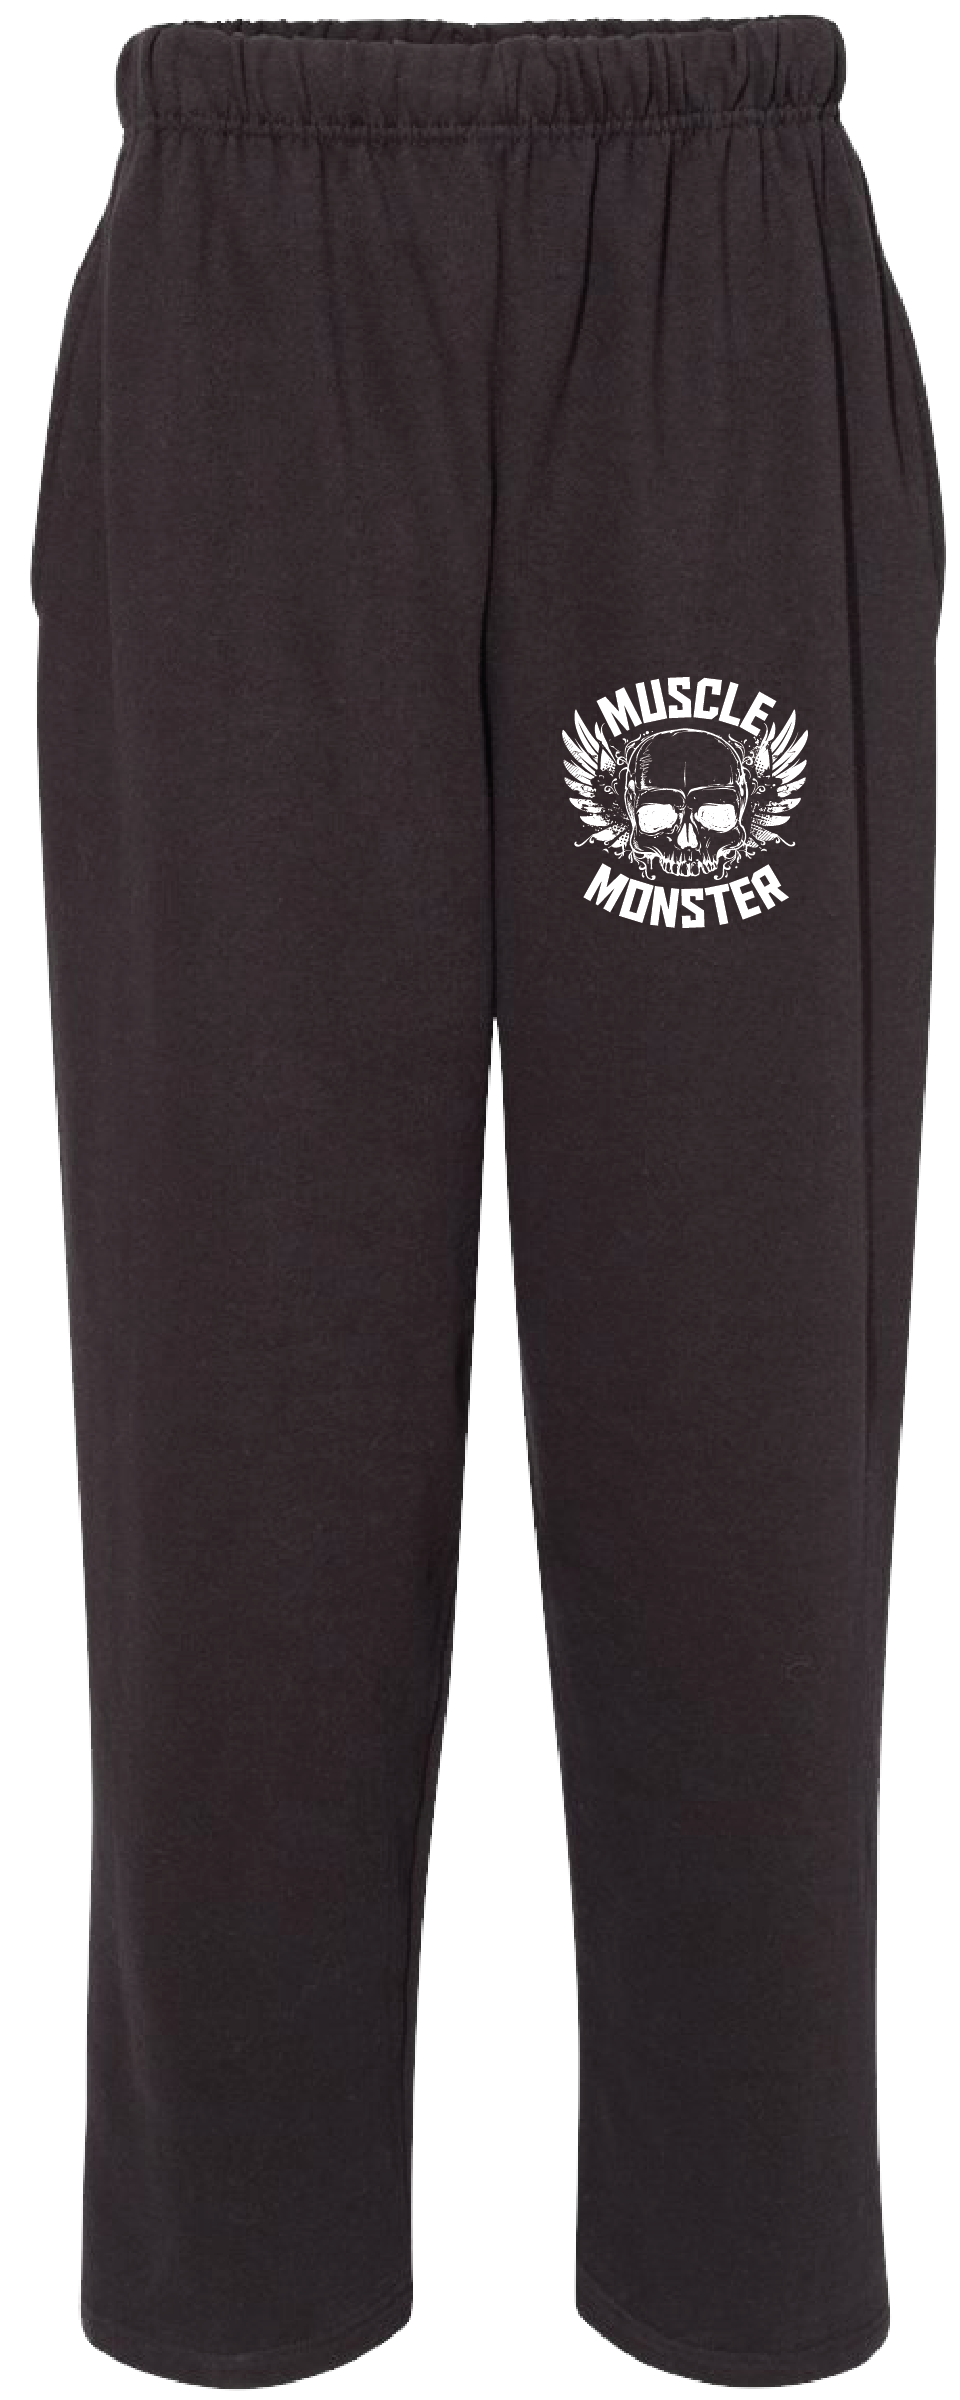 Sweatpants Muscle Monster Eagle Feather Tips 48492